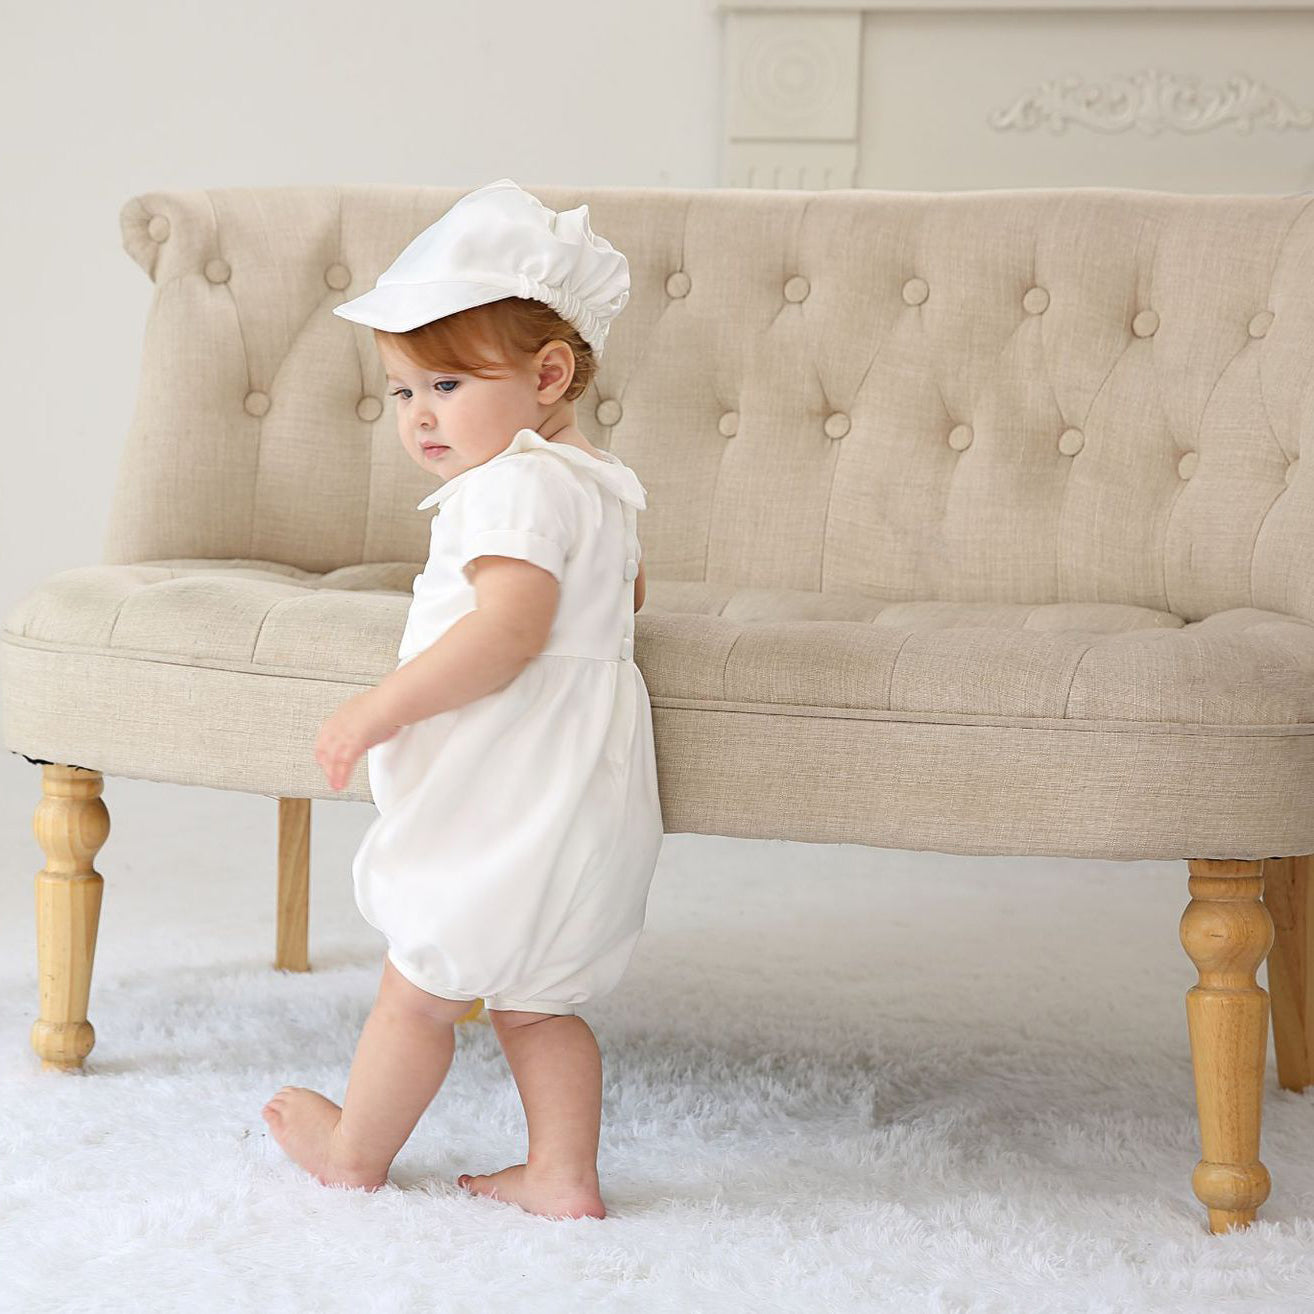 Infant Boys Christening Outfits Peter Collar Cute Babies Baptism Suits with Bonnet